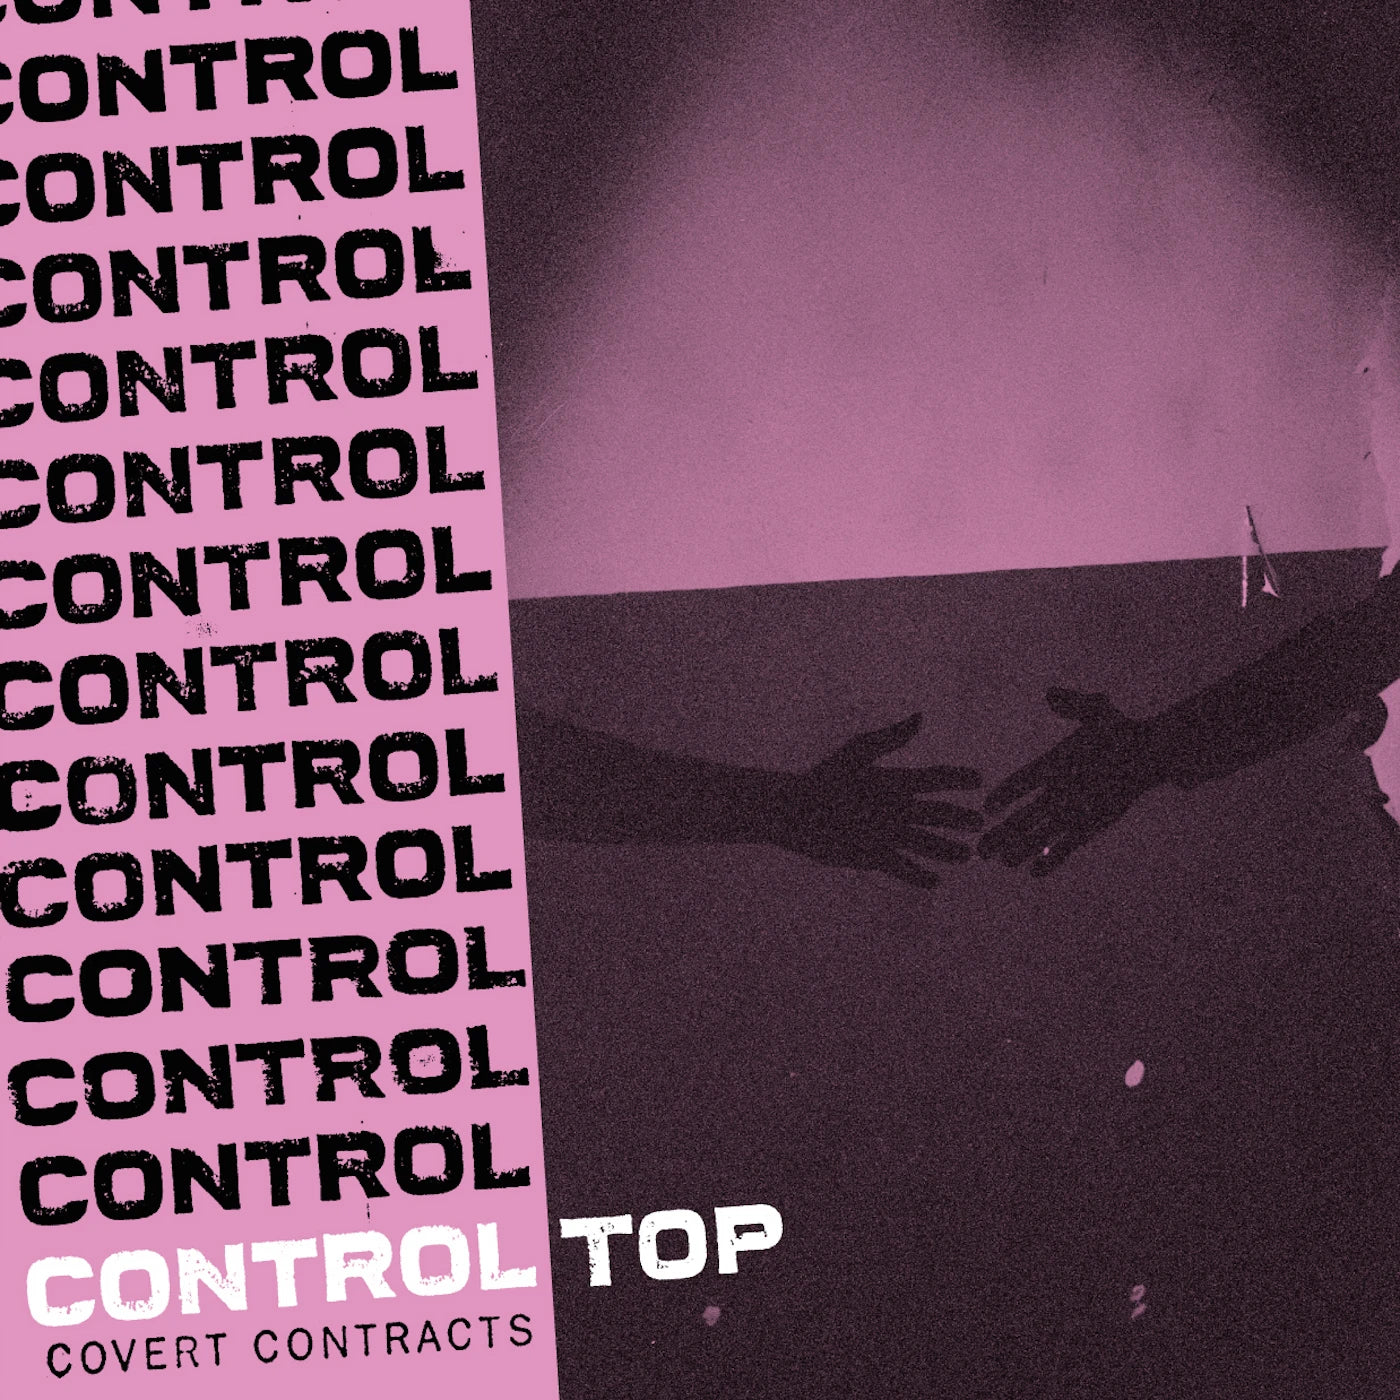 Control Top "Covert Contracts"